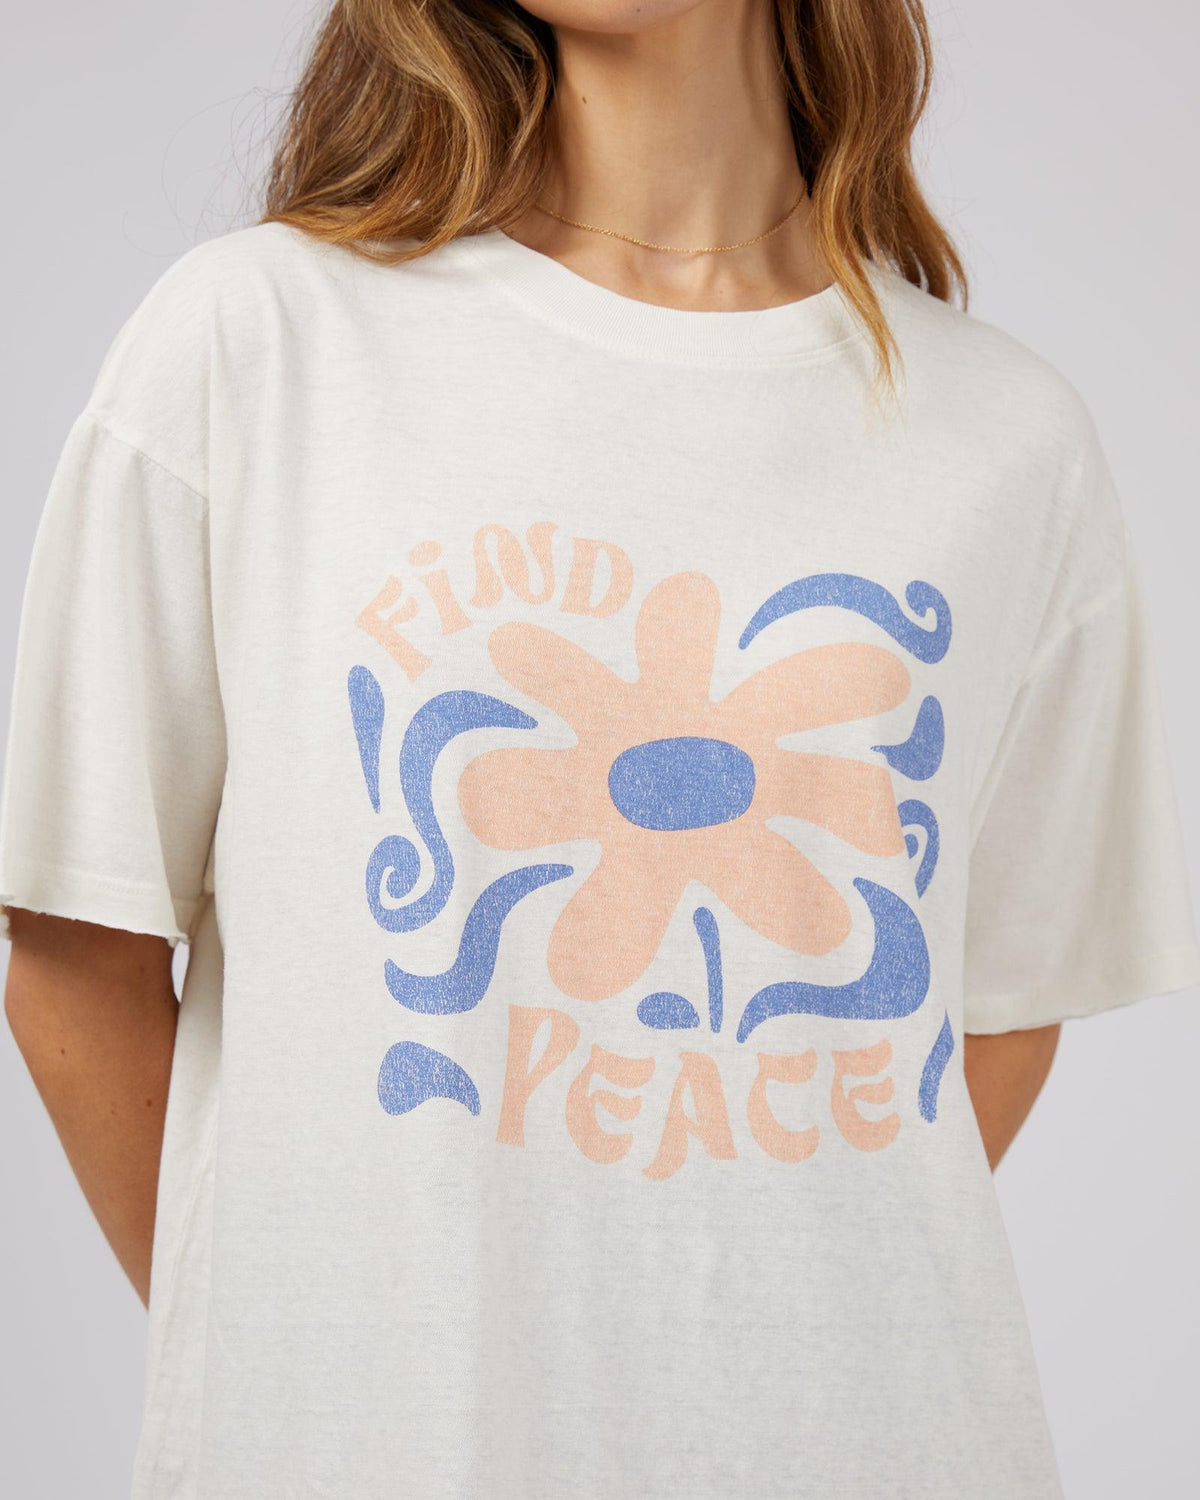 All About Eve-Find Peace Tee Vintage White-Edge Clothing